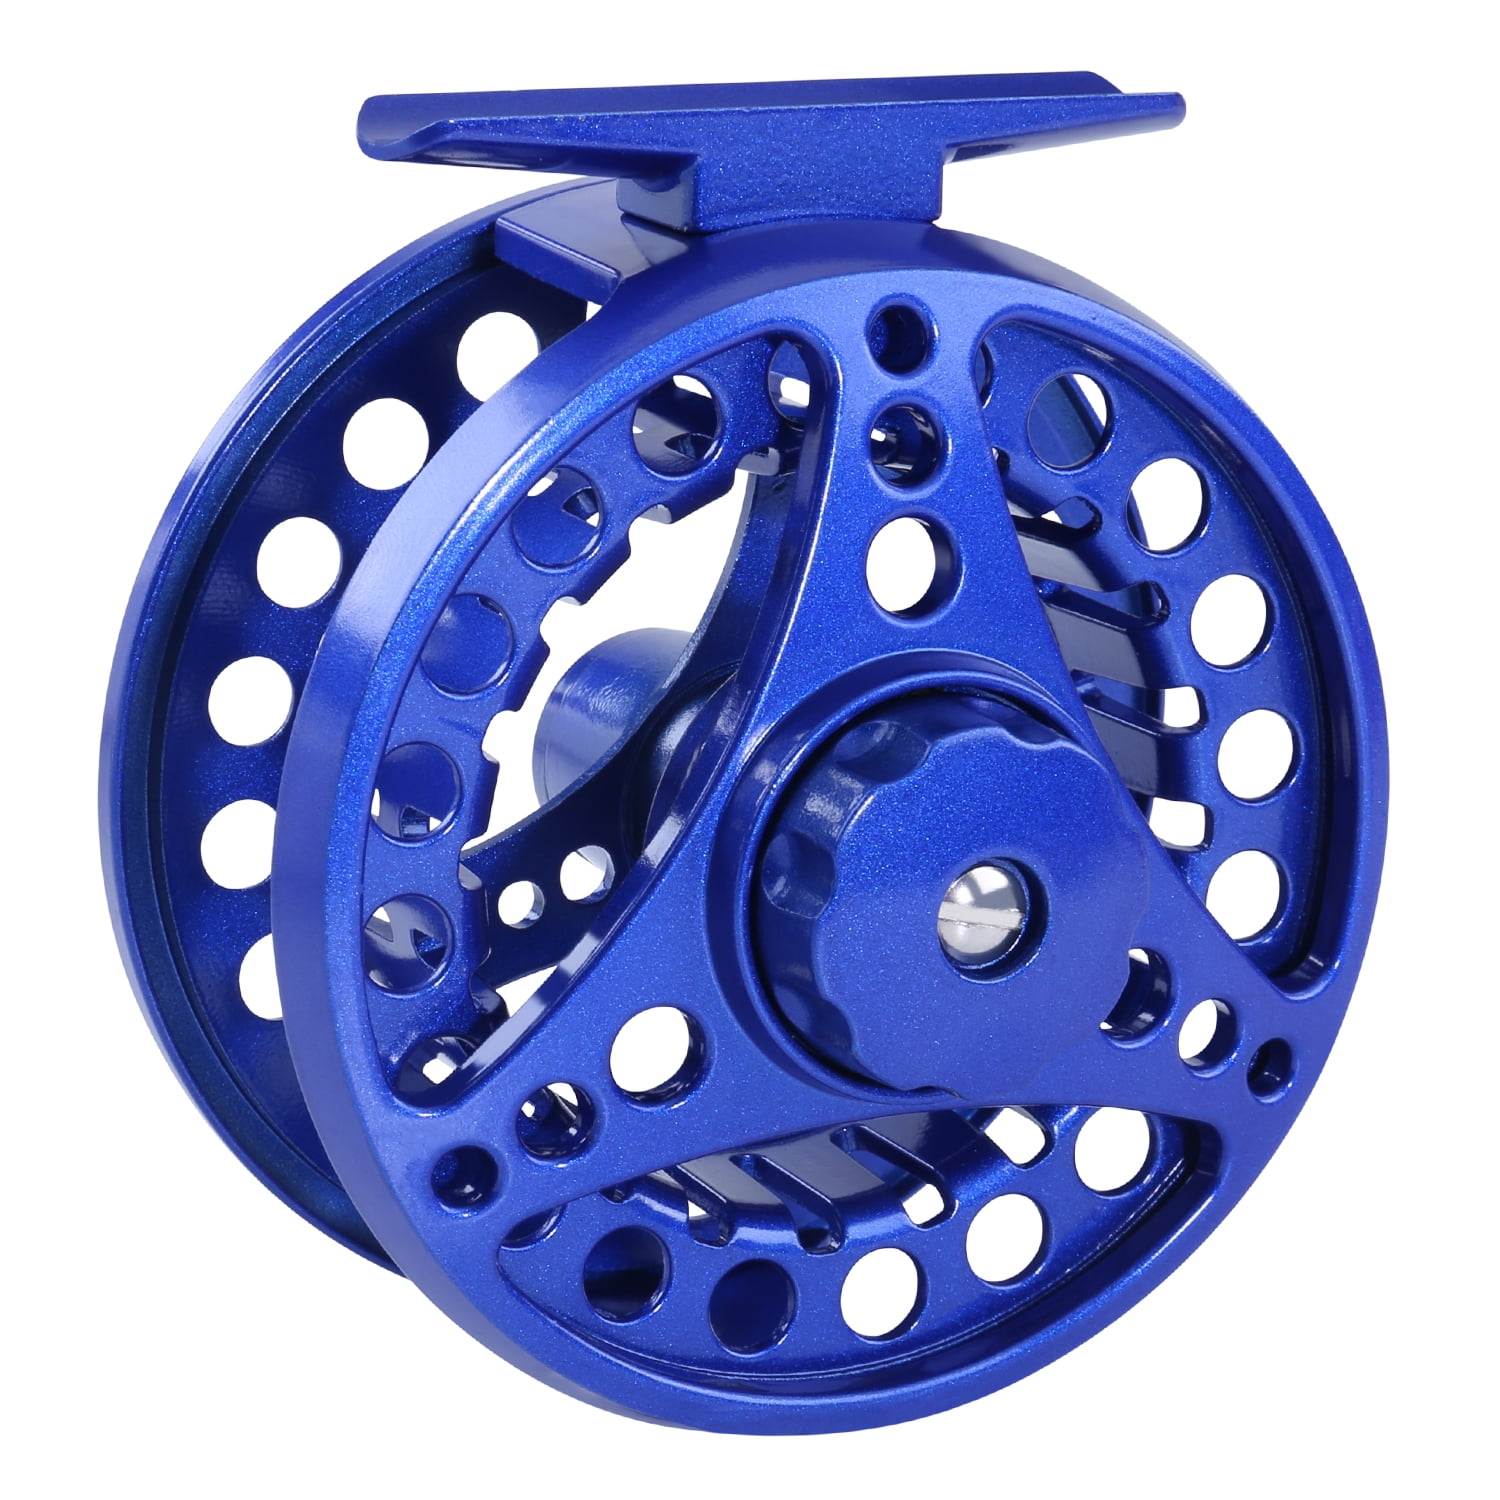  LKJYBG Ice Fishing Reel Accurate Casting Fly Fishing with  Ceramic Outlet Hole Rattle Reels Ice Fishing for Sea 60mm / 58g FD60 Ice  Fishing Reel Blue : Sports & Outdoors